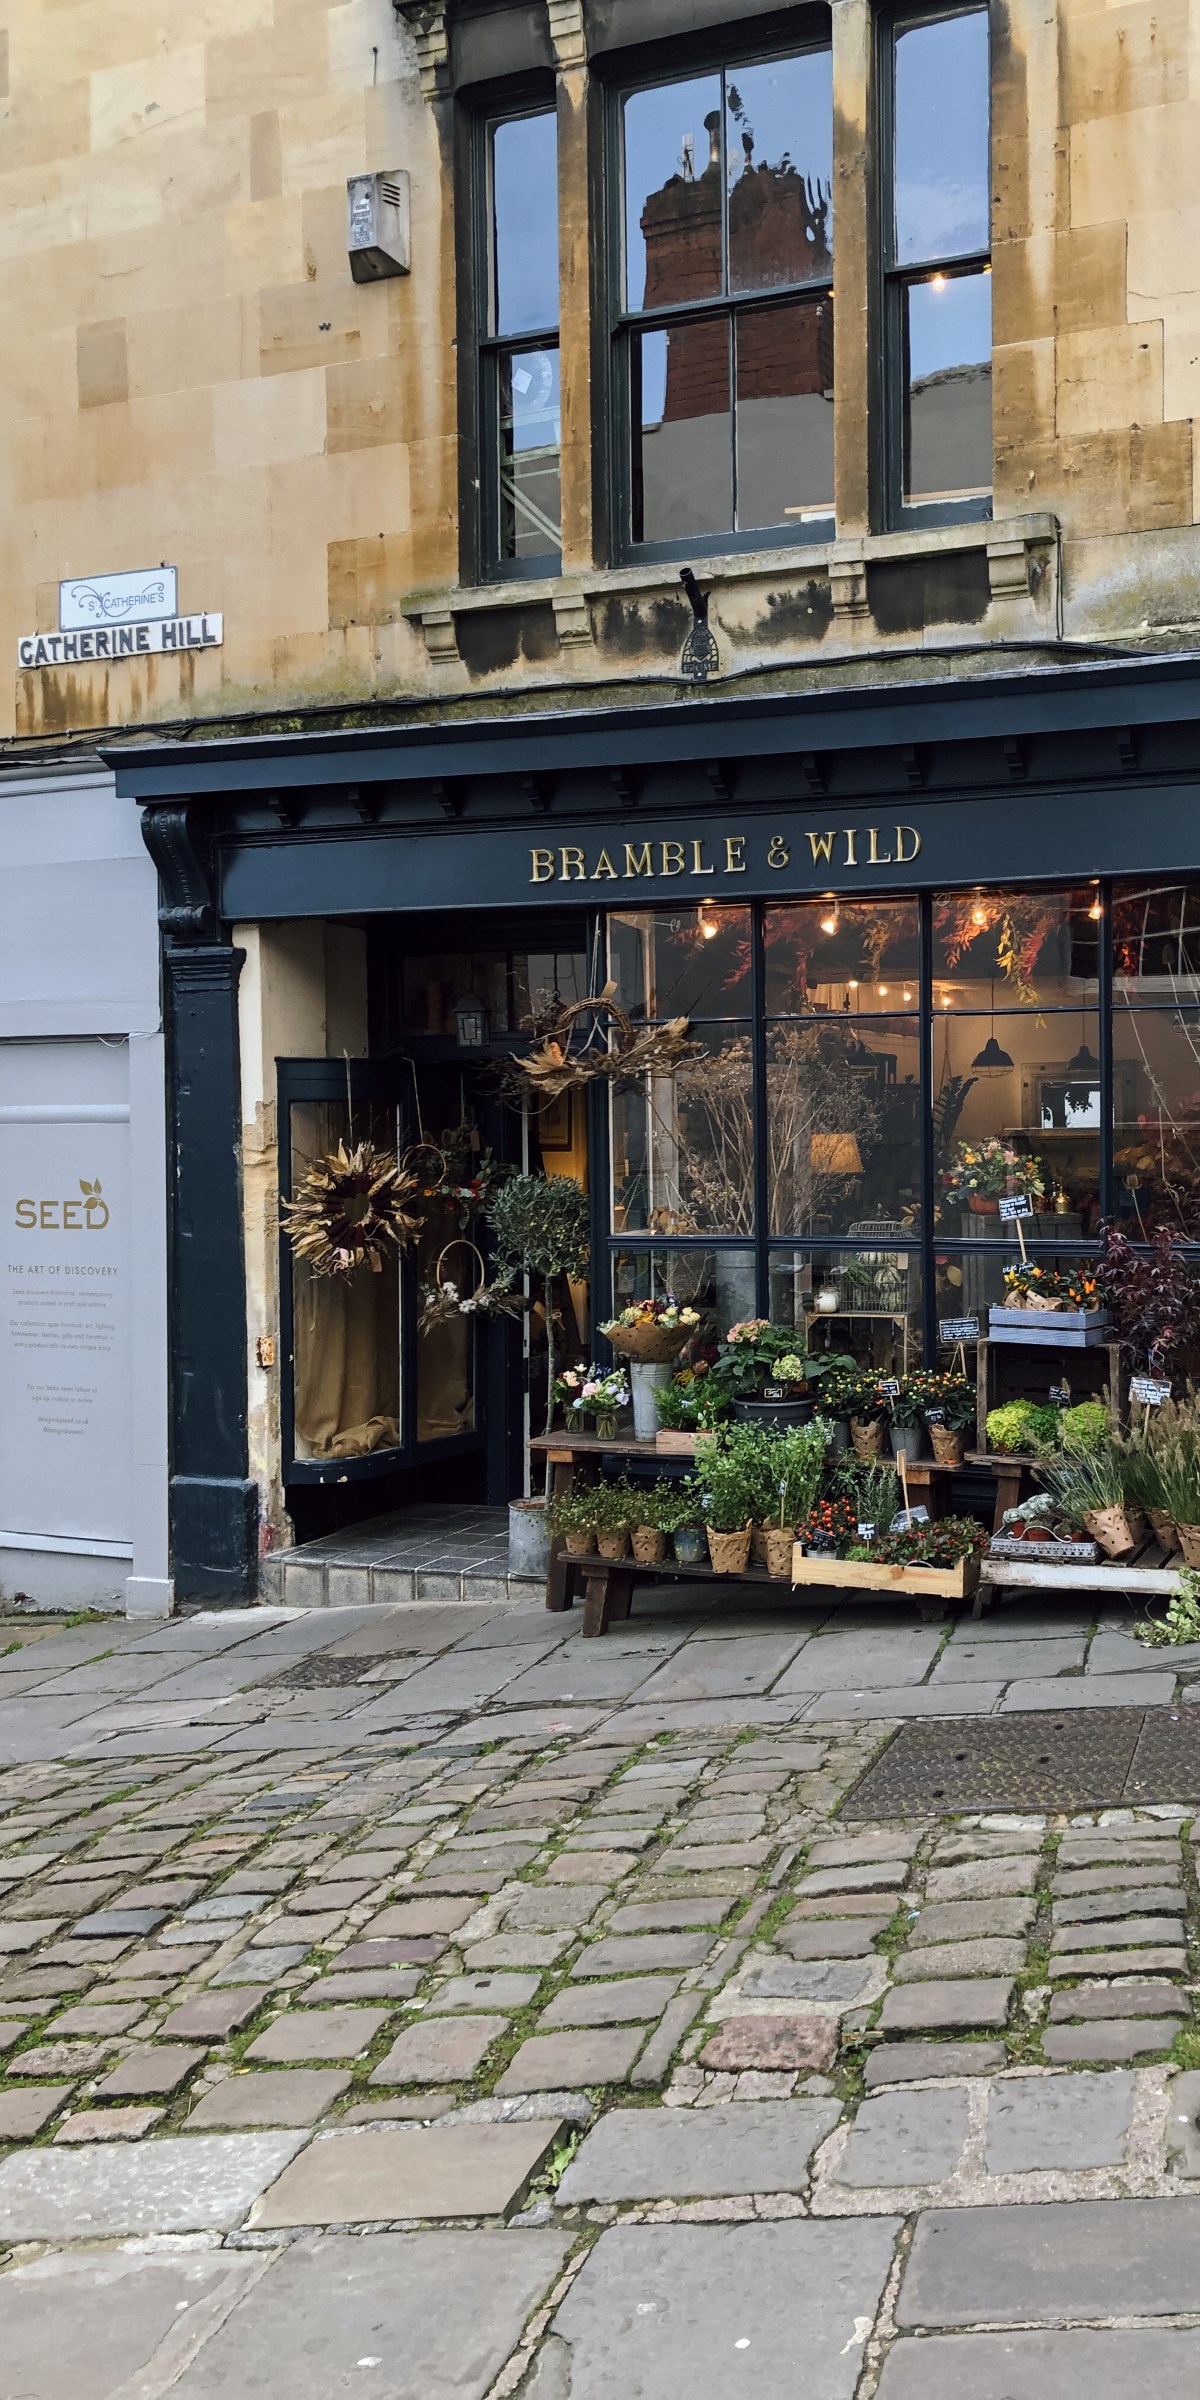 Bramble & Wild in Frome exterior